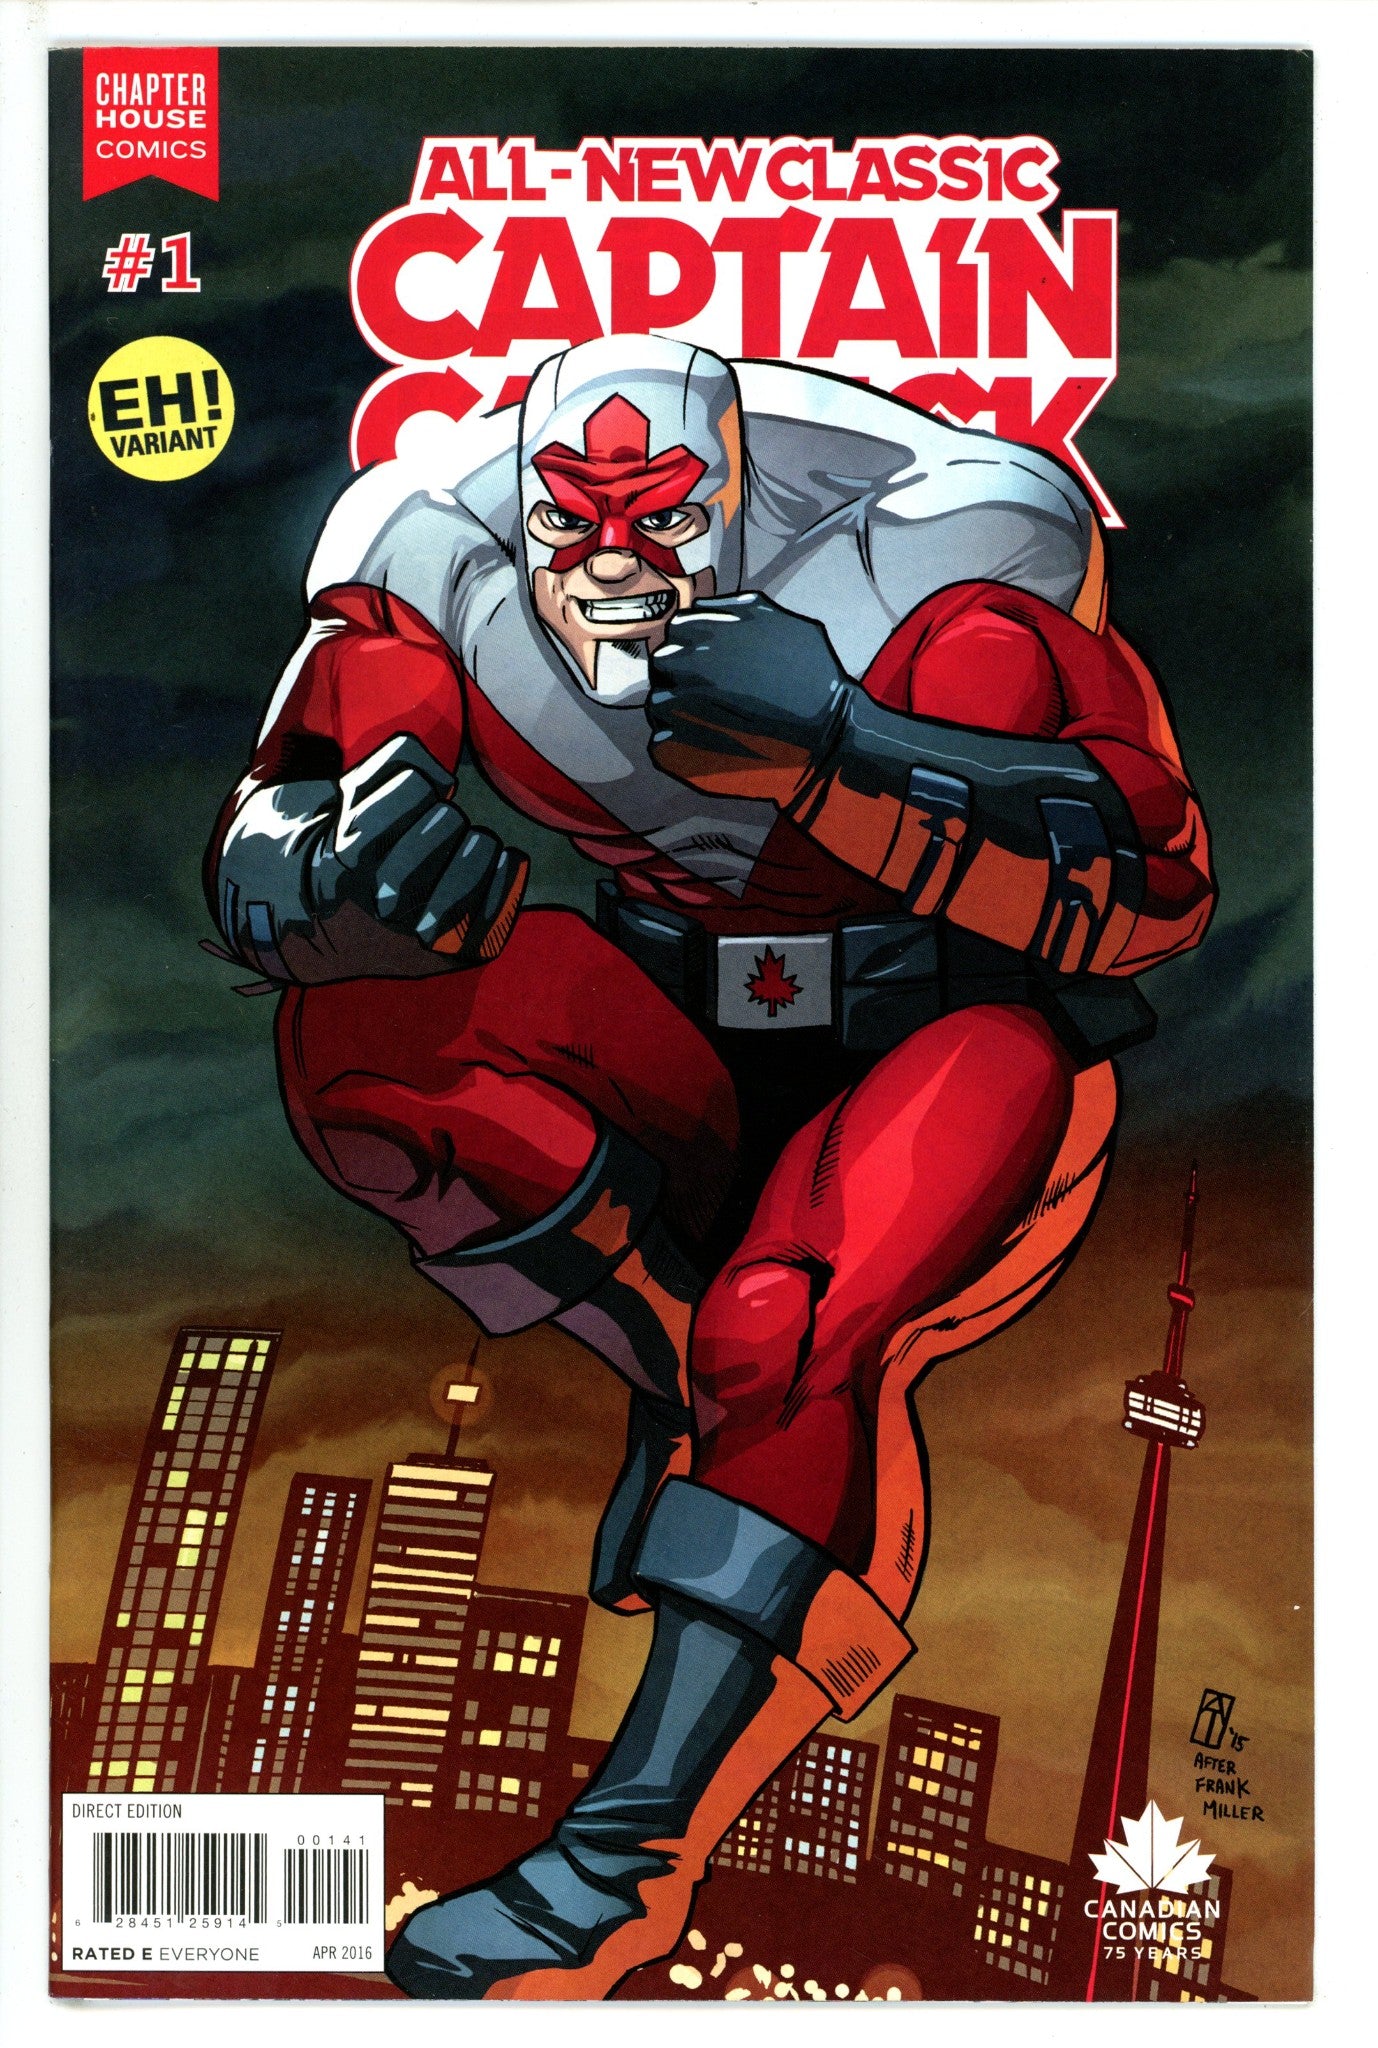 All-New Classic Captain Canuck 1 Thomas Homage Variant (2016)